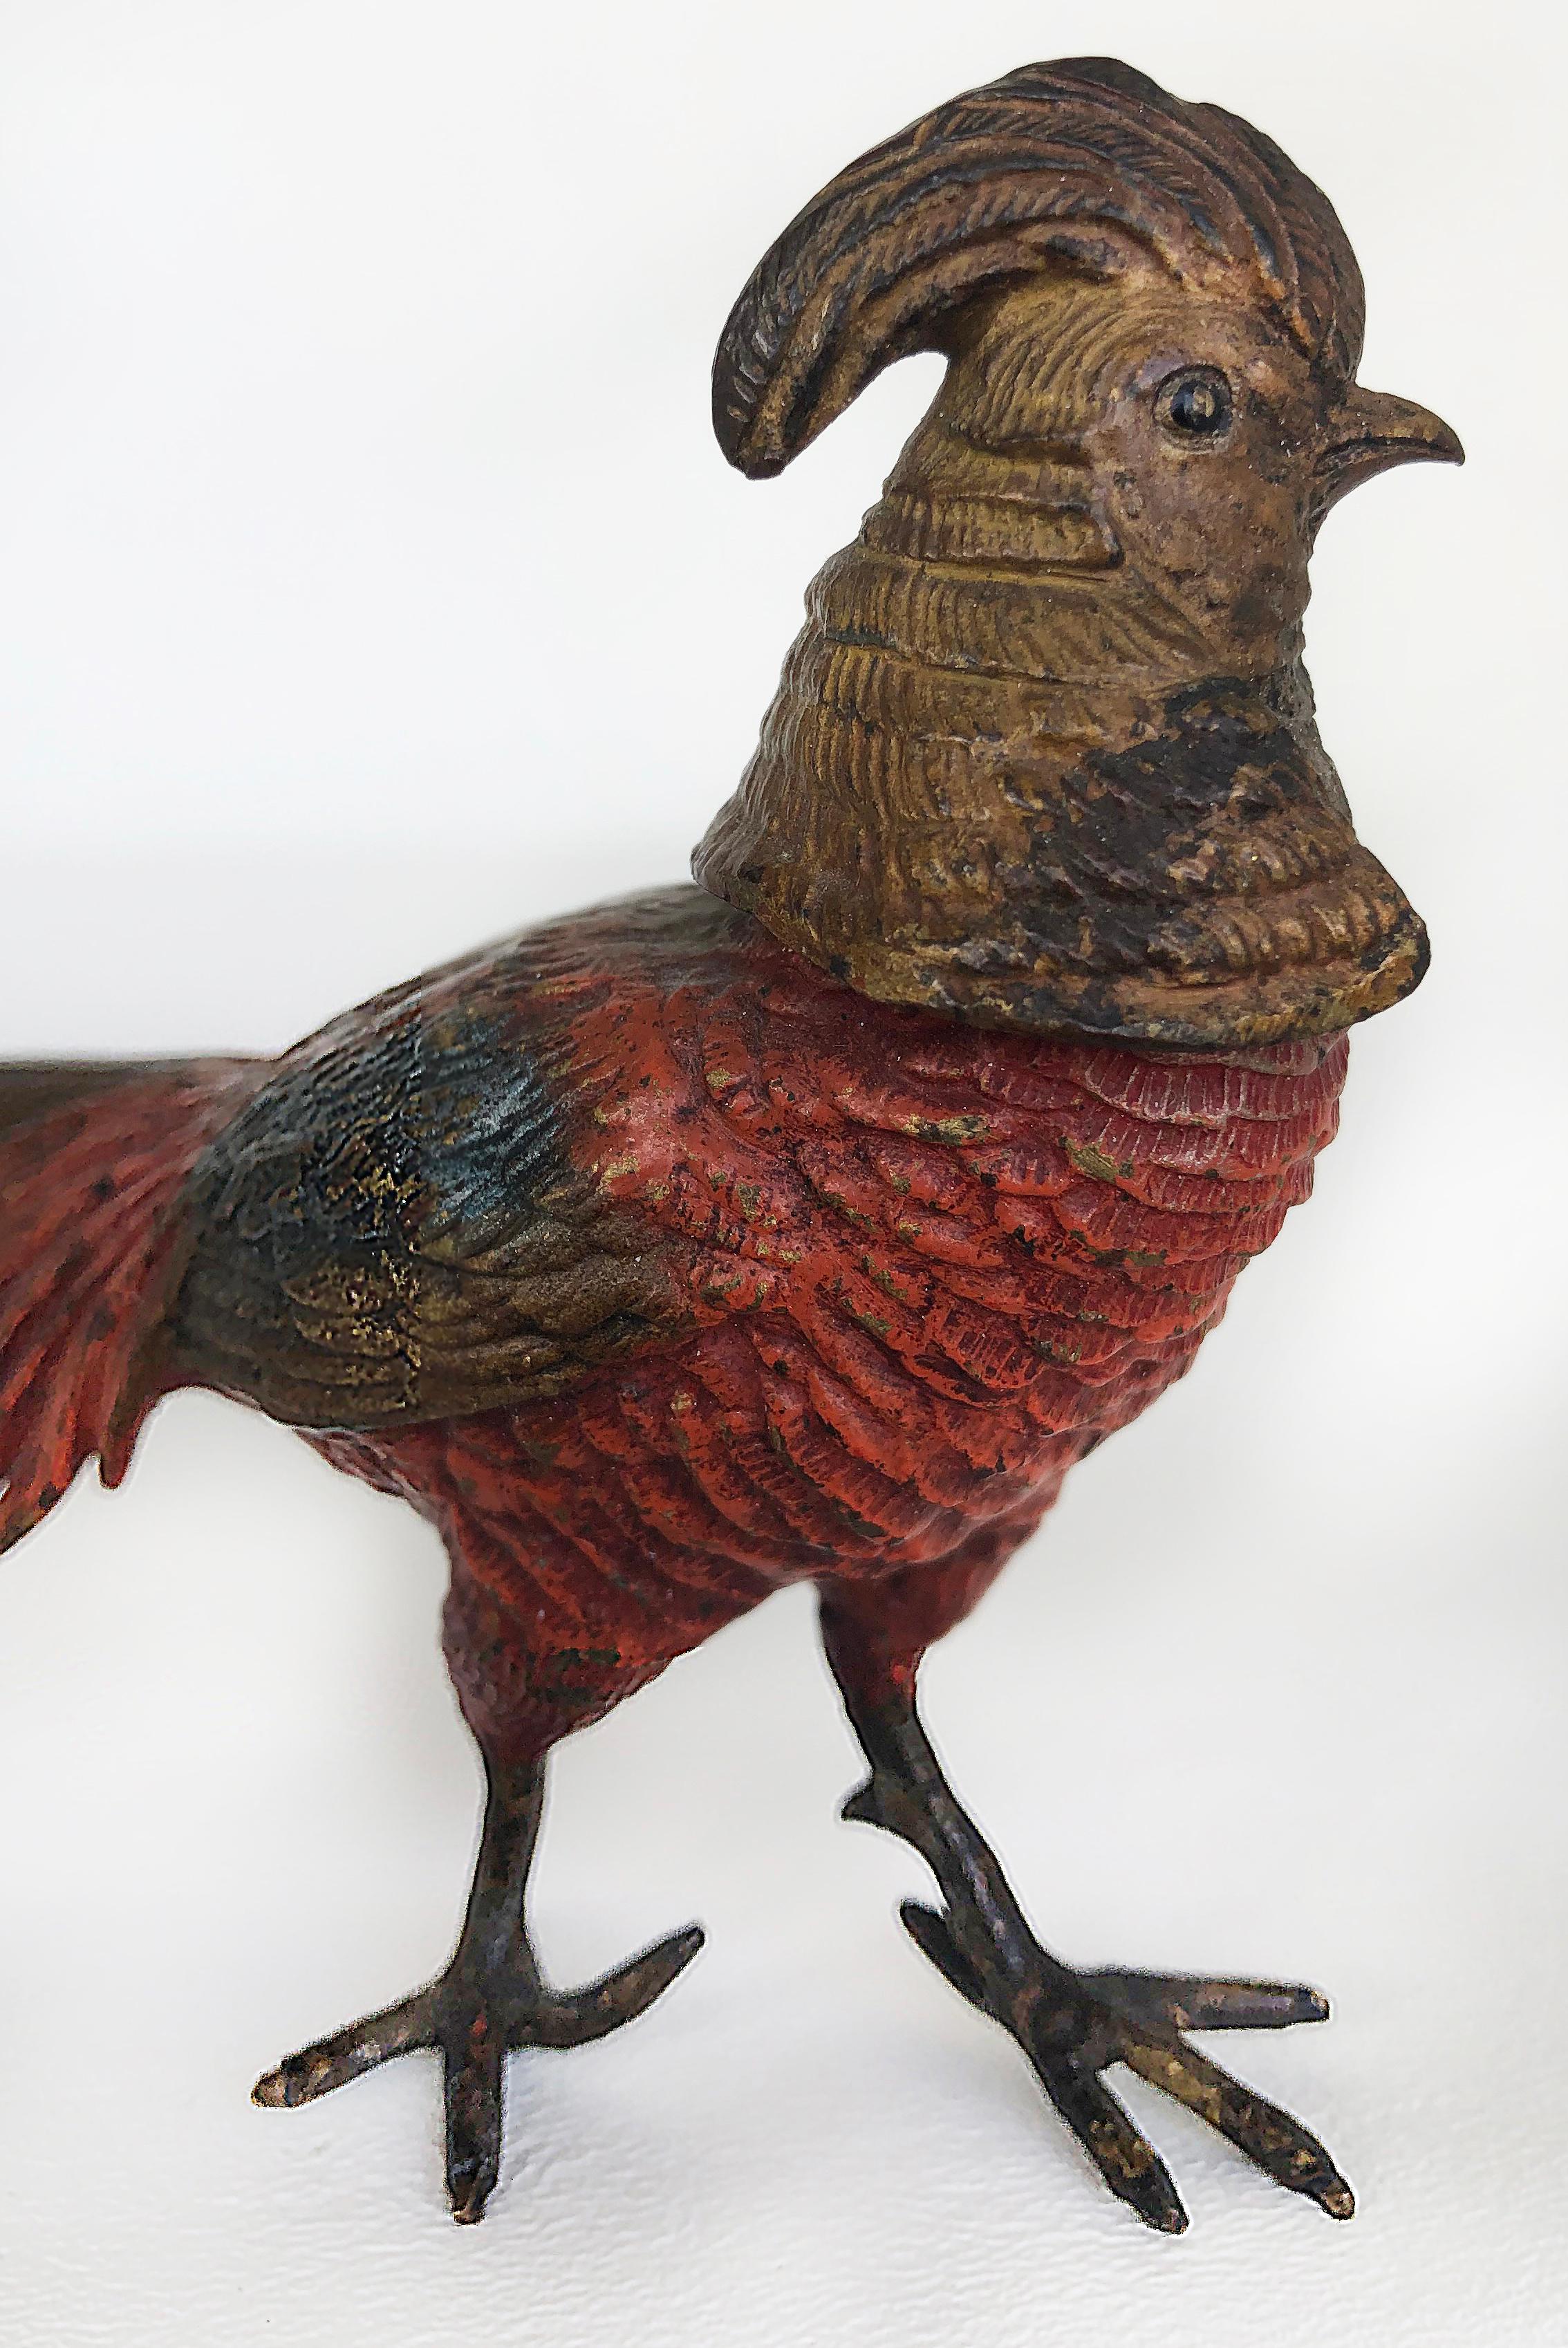 Antique Vienna cold-painted bronze pheasants, a pair

Offered for sale is a pair of Viennese cold-painted bronze figures of pheasants dating to the early 20th century. The pheasants show some age wear with losses to the paint finishes.